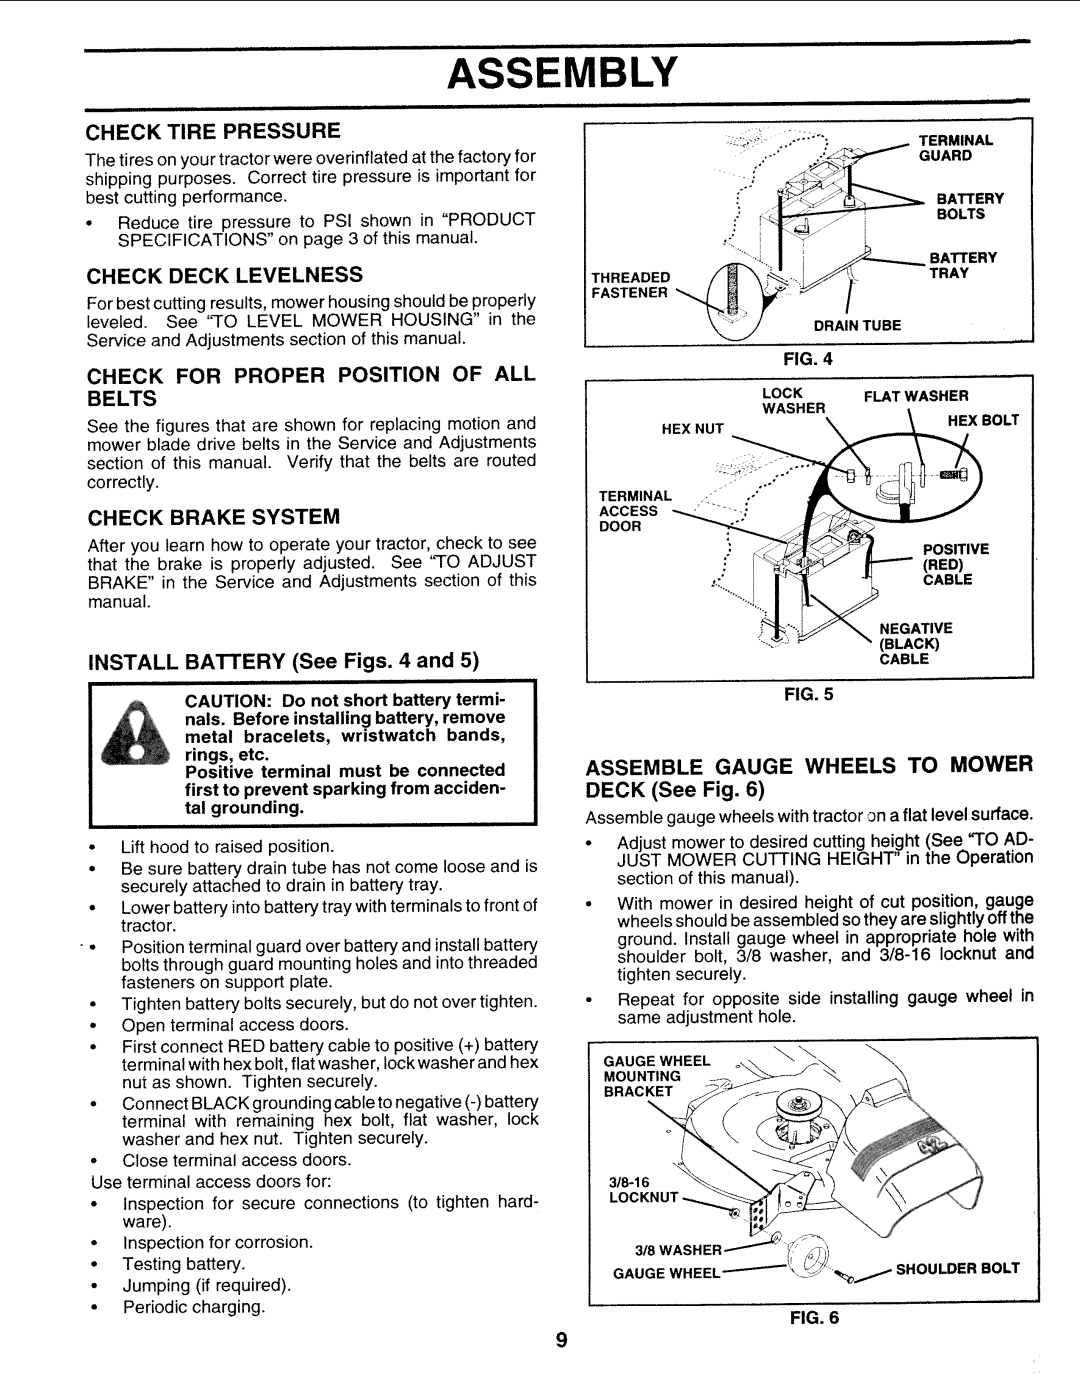 Sears 917.25271 Check Tire Pressure, Check Deck Levelness, Check For Proper Position Of All Belts, Check Brake System, Fig 